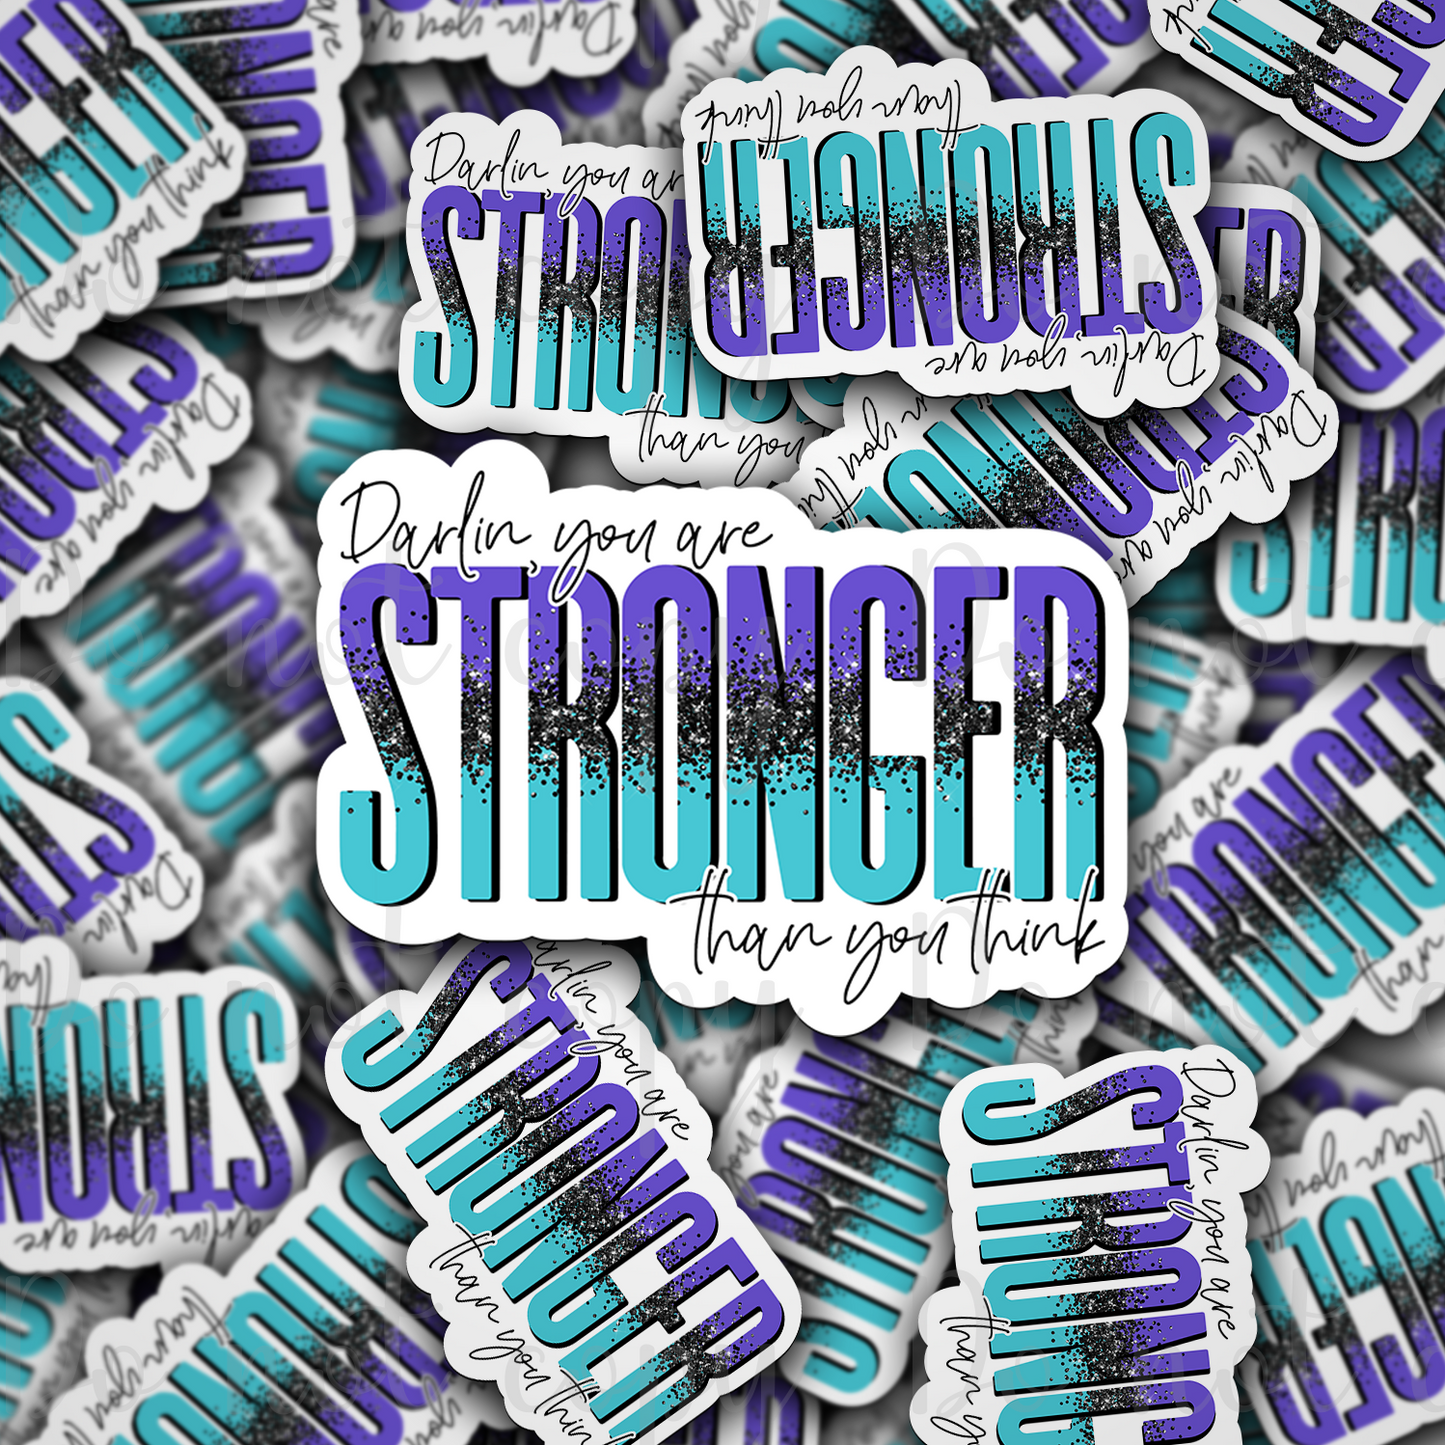 Darlin you are stronger than you think Die cut sticker 3-5 Business Day TAT